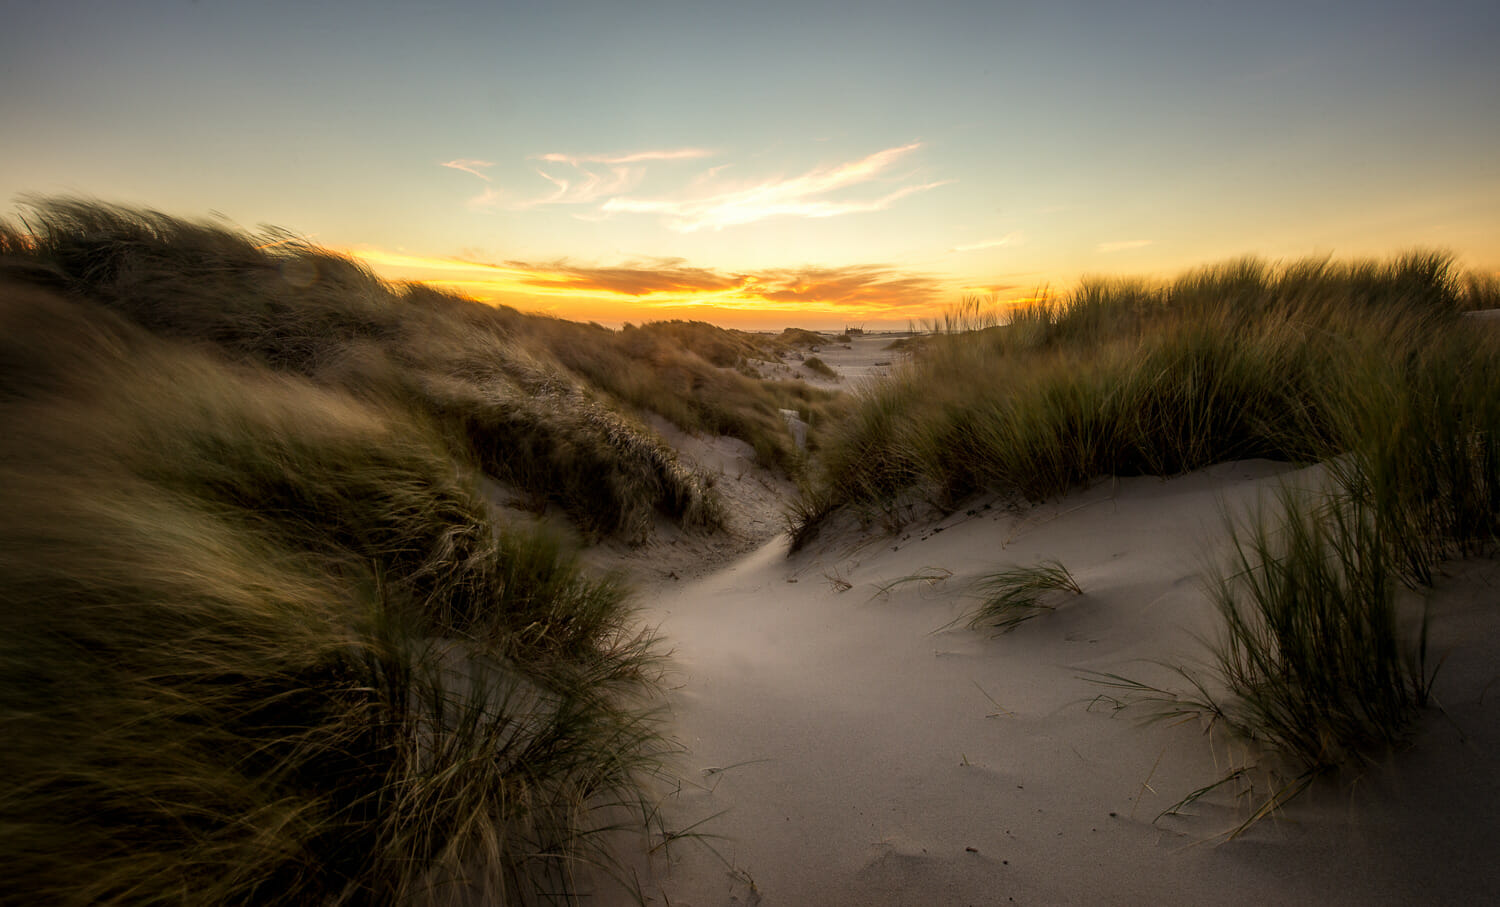 Grasses on sand dunes blow in the wind at sunset